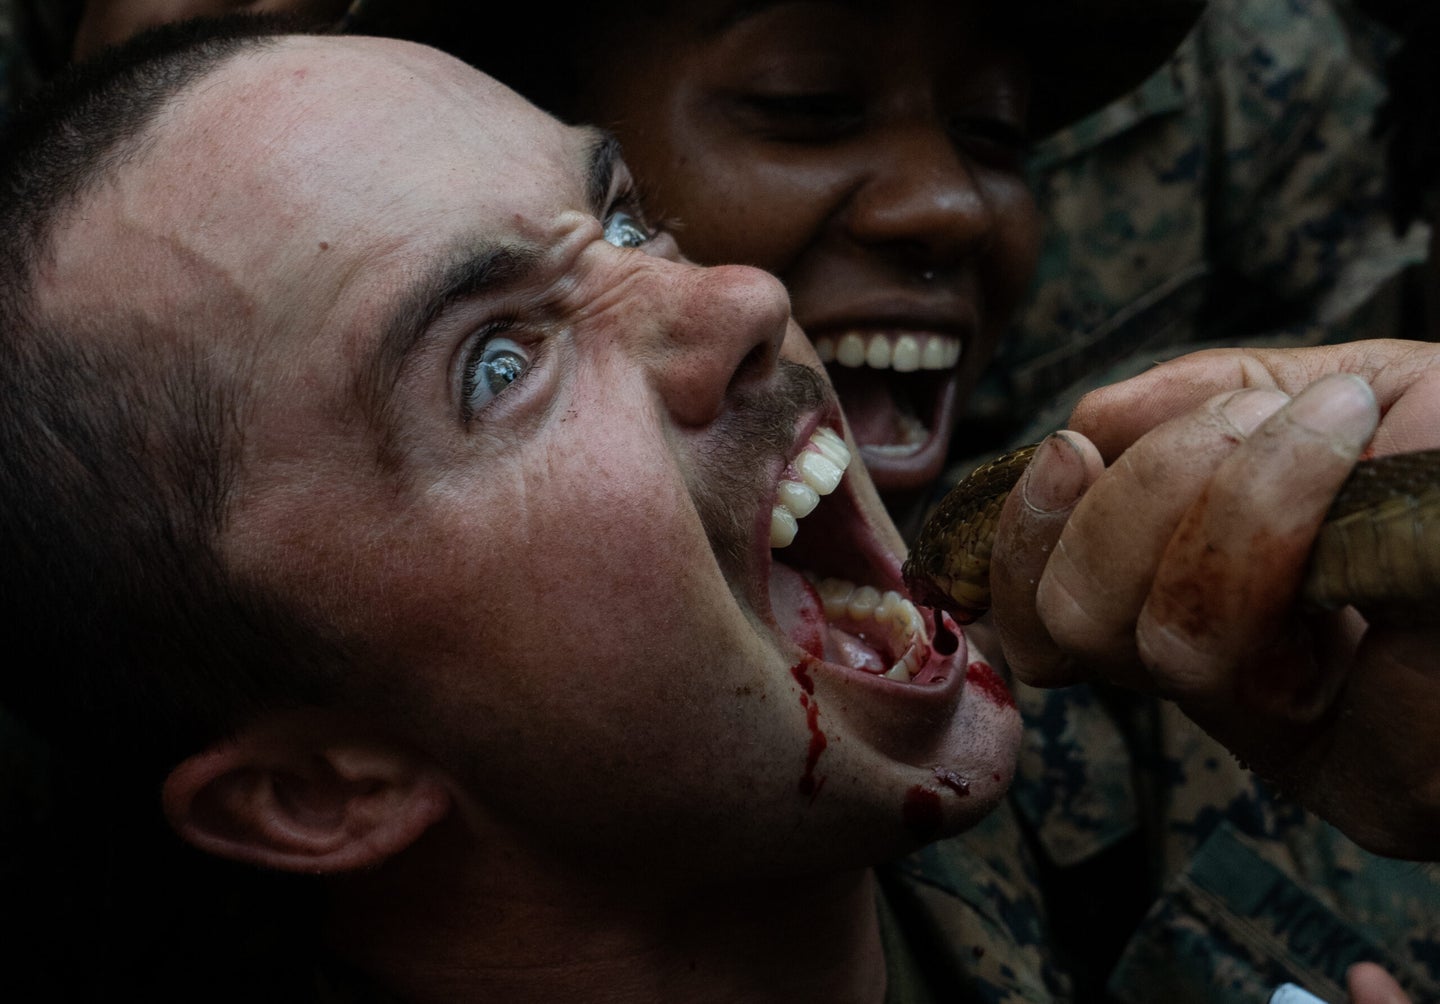 U.S. Marines Lance Cpl. Lance with 1st Battalion, 5th Marine Regiment, drinks the blood of a king cobra as part of jungle survival training during exercise Cobra Gold 2020 at Ban Chan Khrem, Chanthaburi, Kingdom of Thailand, Mar. 1, 2020.The Marines learned essential skills necessary for surviving in a jungle environment, such as making a fire, eating plants and alternative ways to stay hydrated. Drinking the blood of a cobra provides the body with extra nutritional to help it stay alive, but is meant as a last resort option. Exercise Cobra Gold 20 is the largest Theater Security Cooperation exercise in the Indo-Pacific region and is an integral part of the U.S. Commitment to strengthen engagement in the region. (U.S. Army Photo by Sgt. Nicolas Cholula)